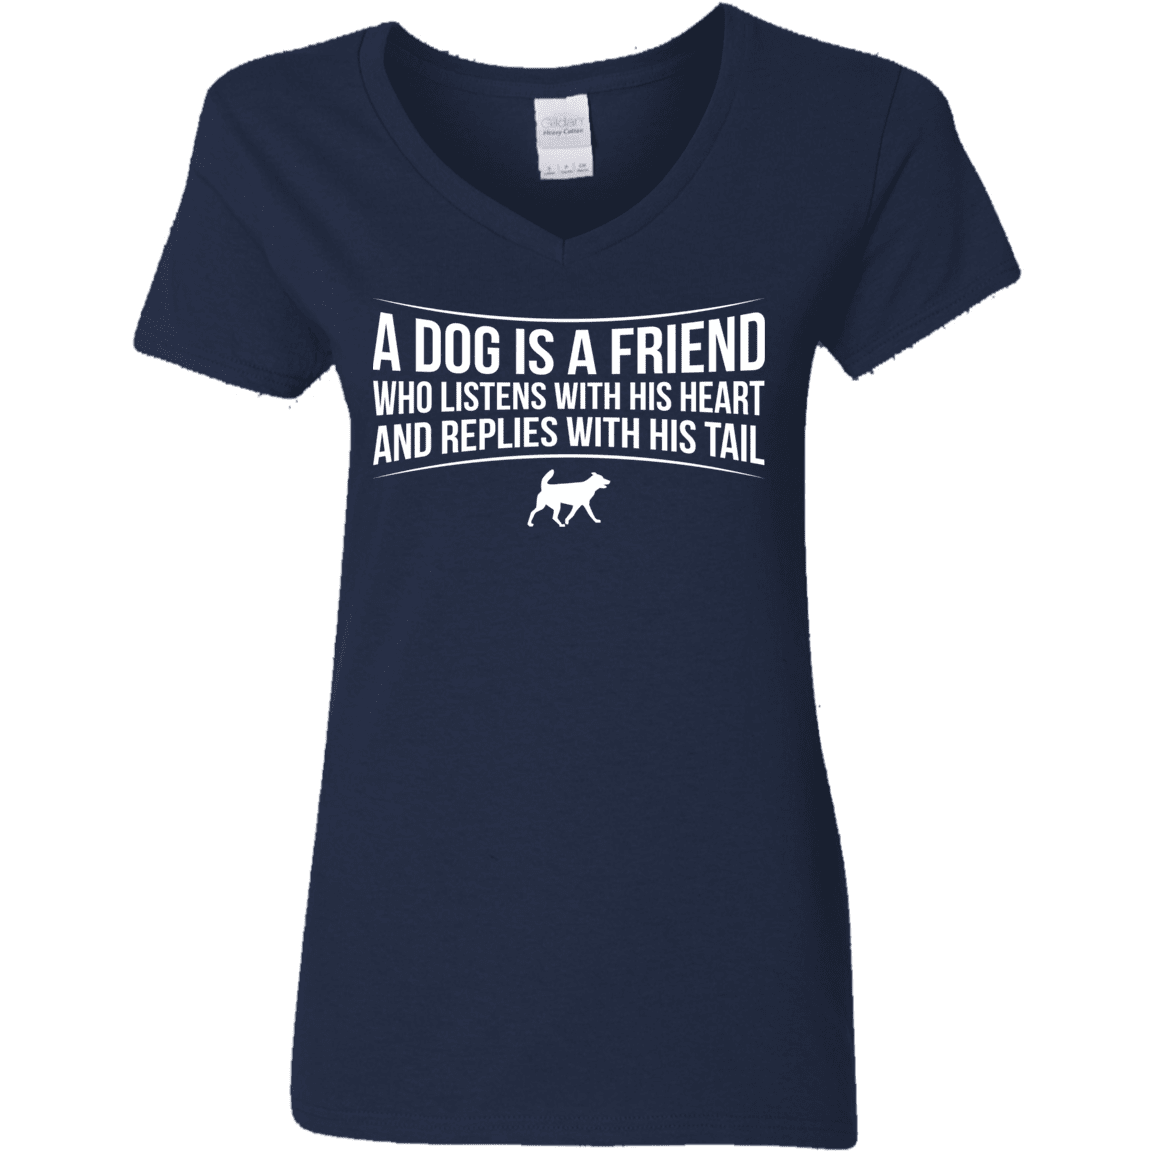 A Dog Is A Friend - Ladies V Neck.